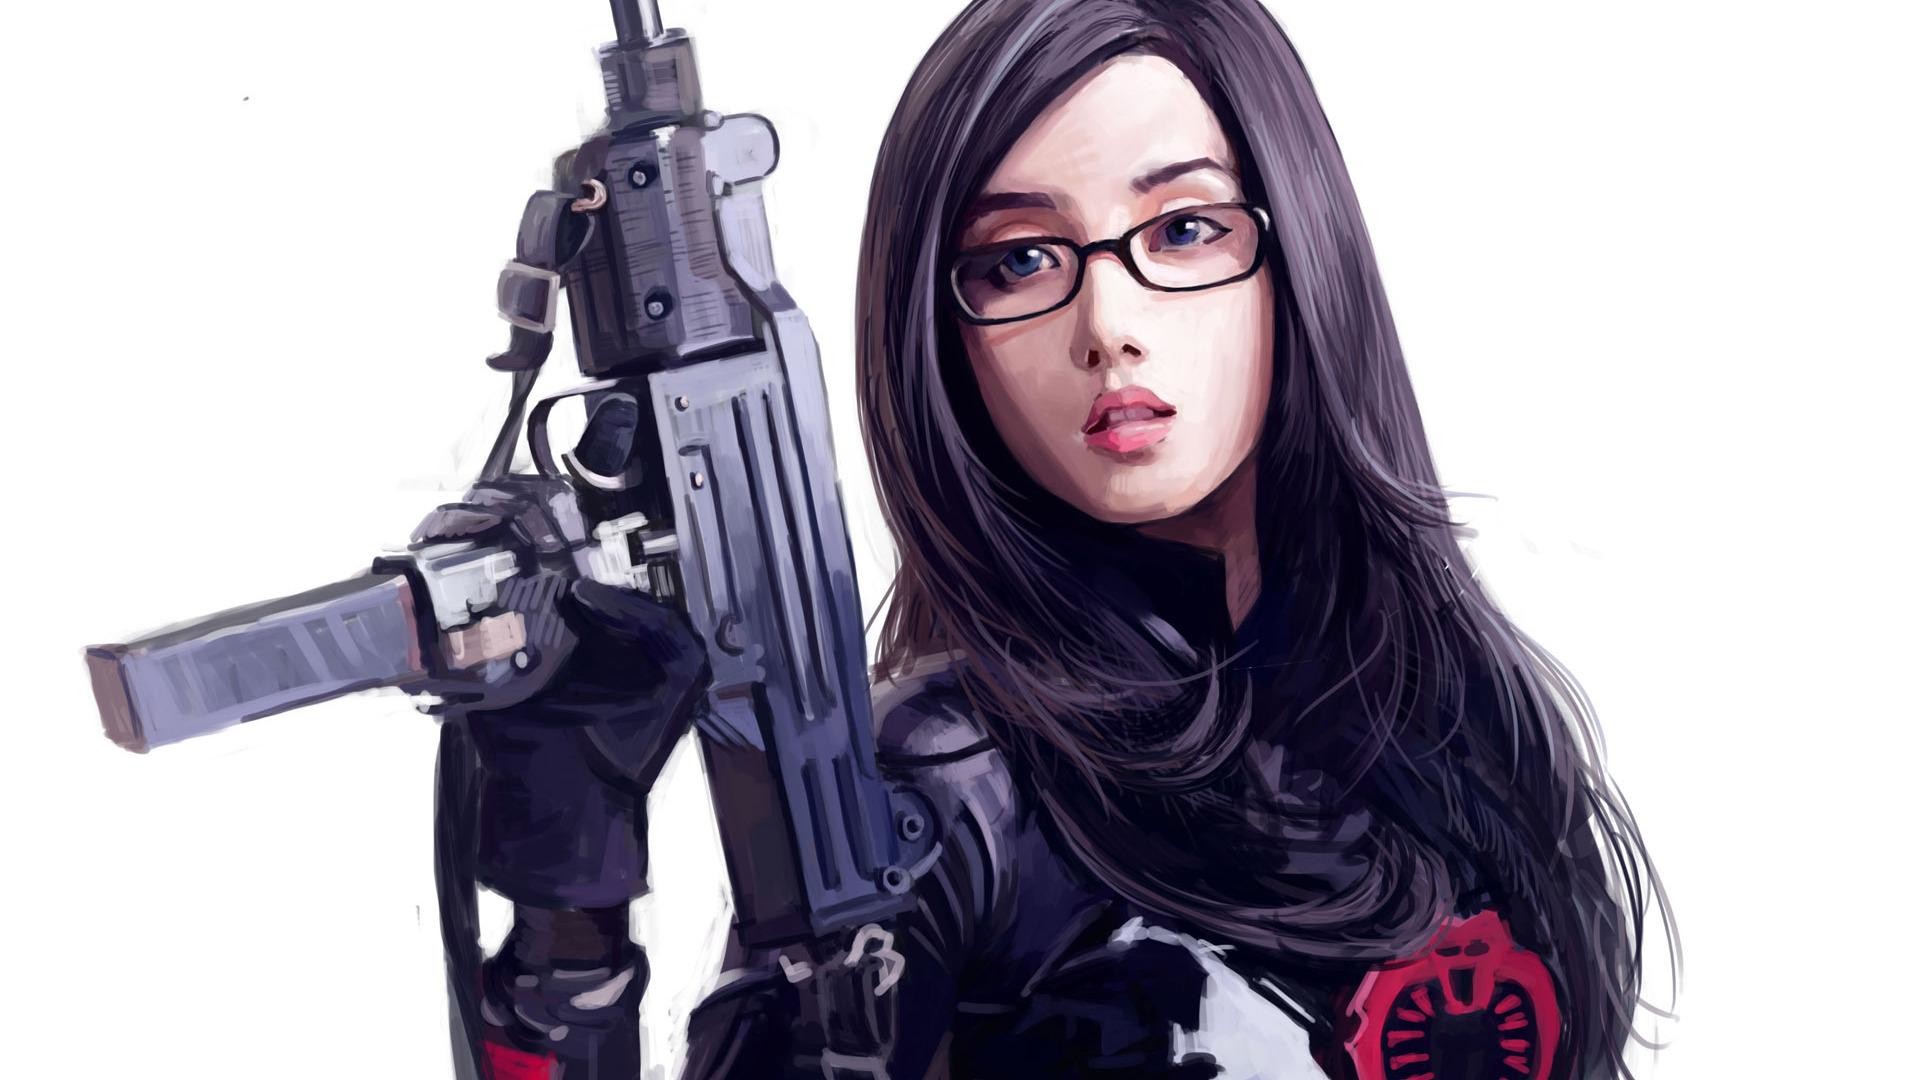 1920x1080 Girls With Guns HD Wallpapers Cute Expression